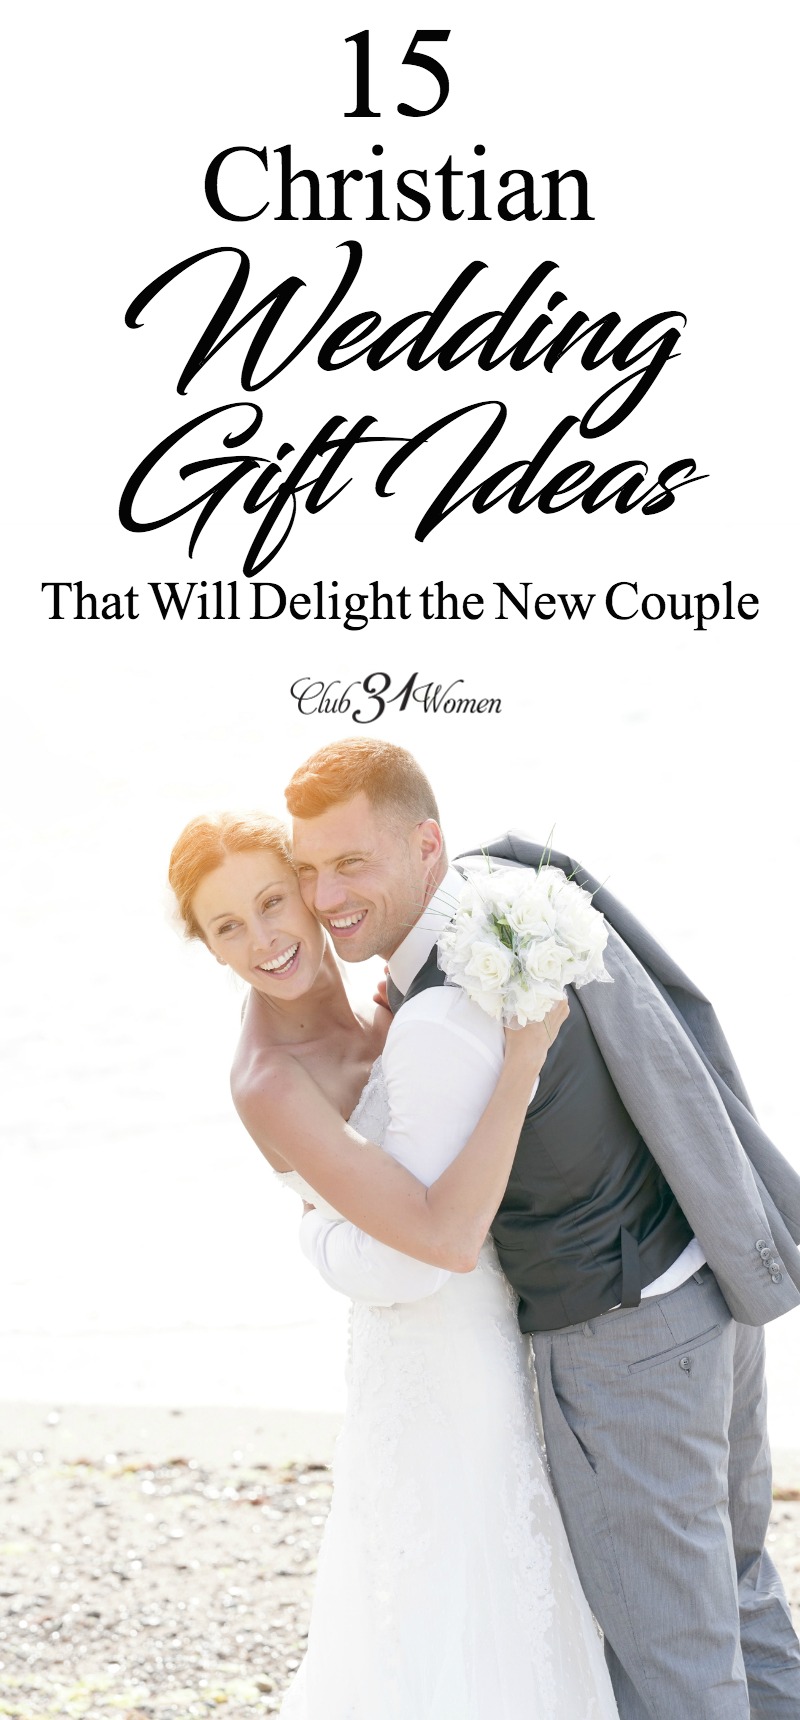 15 Christian Wedding Gift Ideas to Bless The New Couple ...